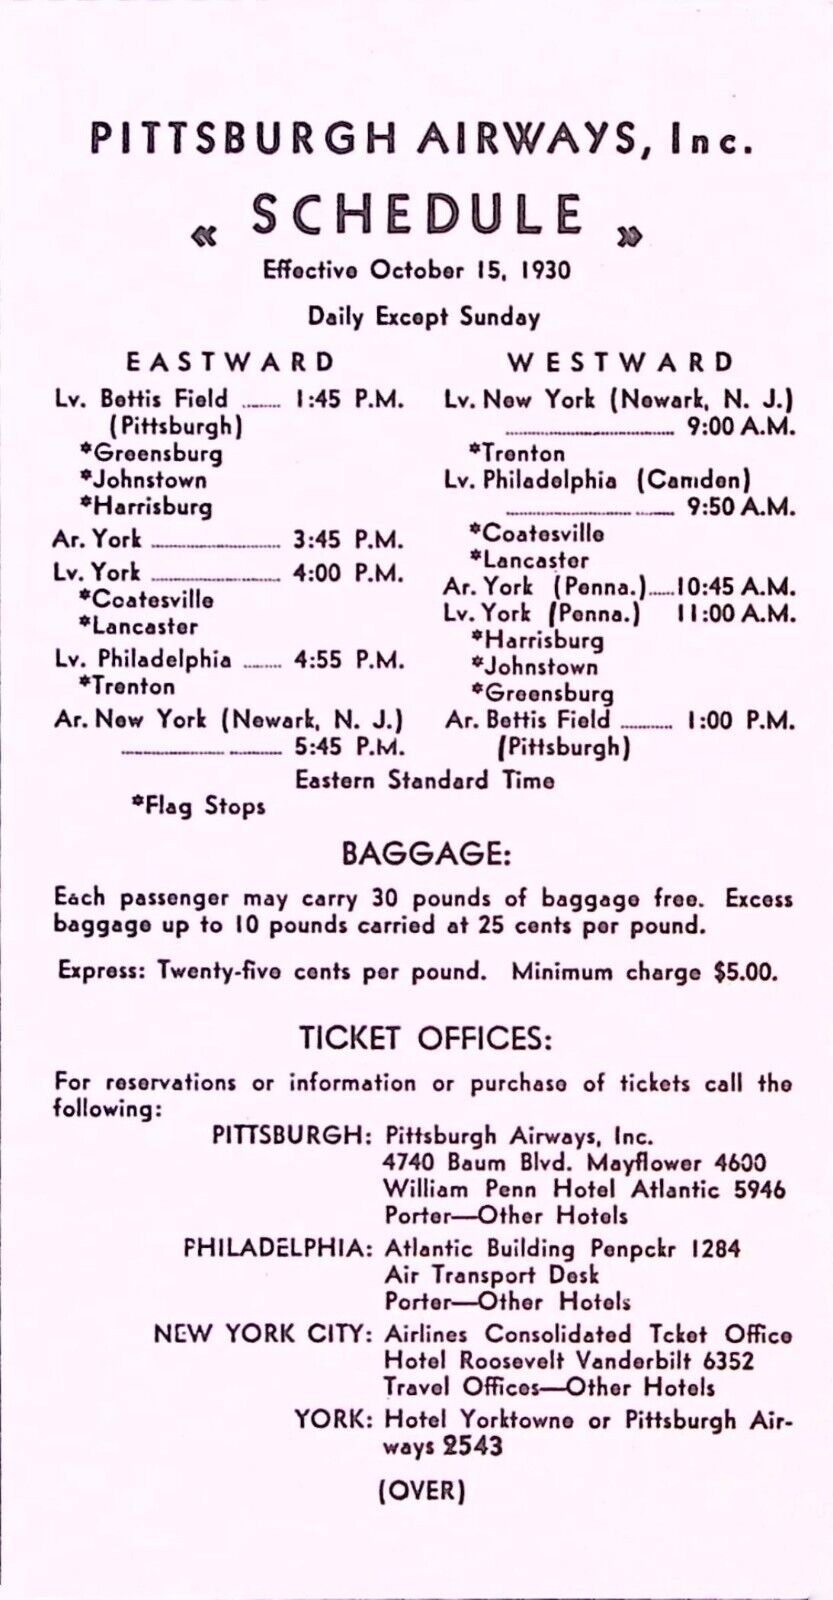 Rare Pittsburgh Airways Schedule Time Table 1930 Airline Aviation Collectible